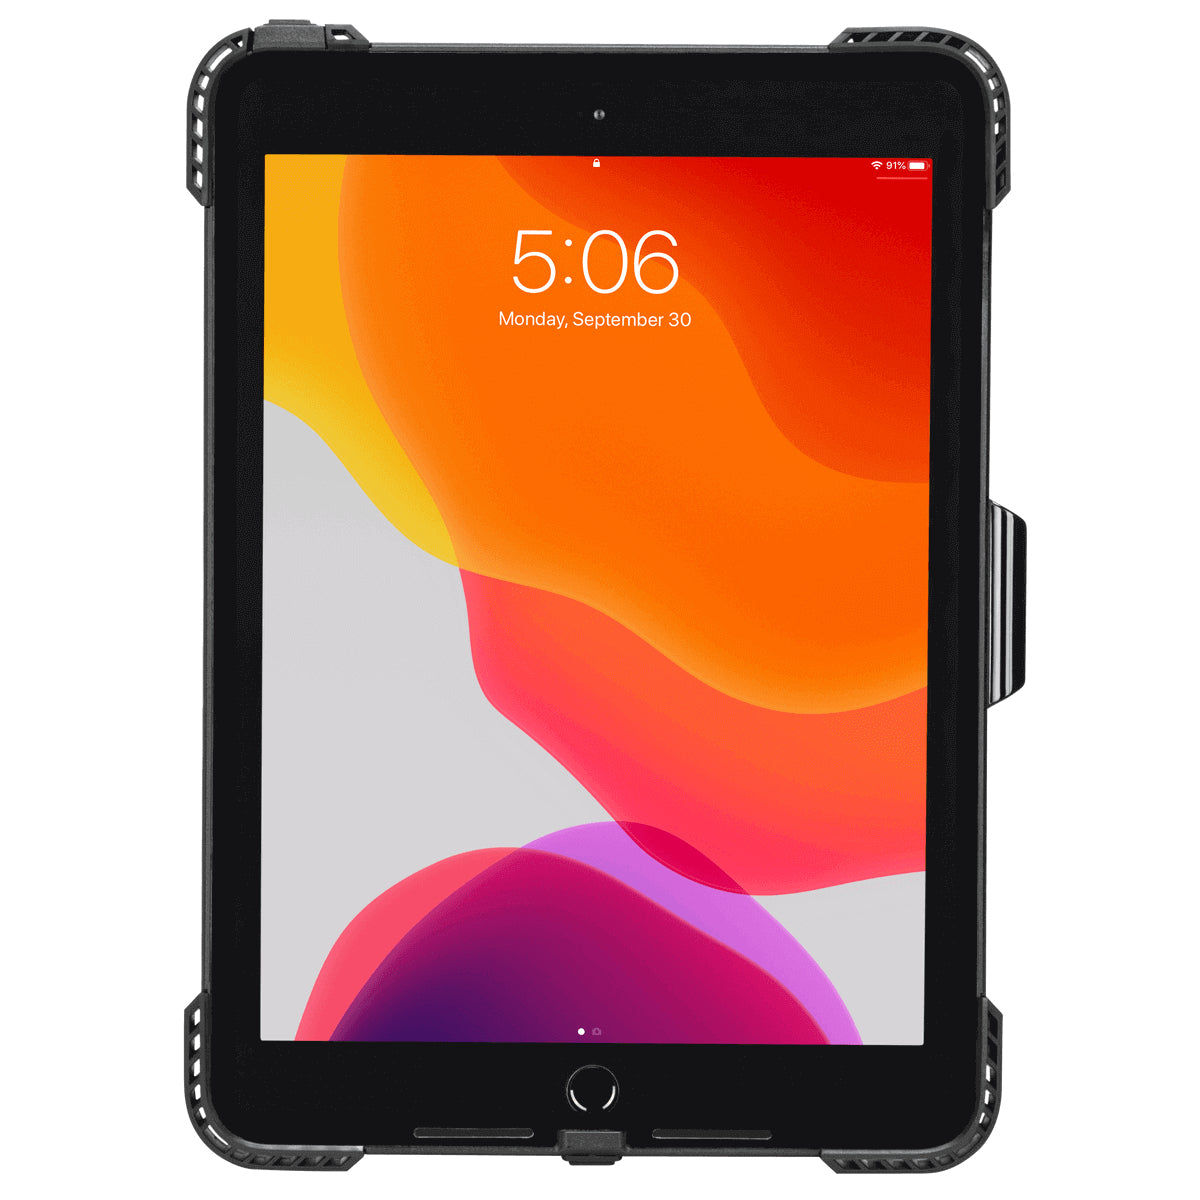 TARGUS SAFEPORT RUGGED CASE FOR IPAD CASE 9TH 8TH 7TH GEN 10.2 INCH BLACK